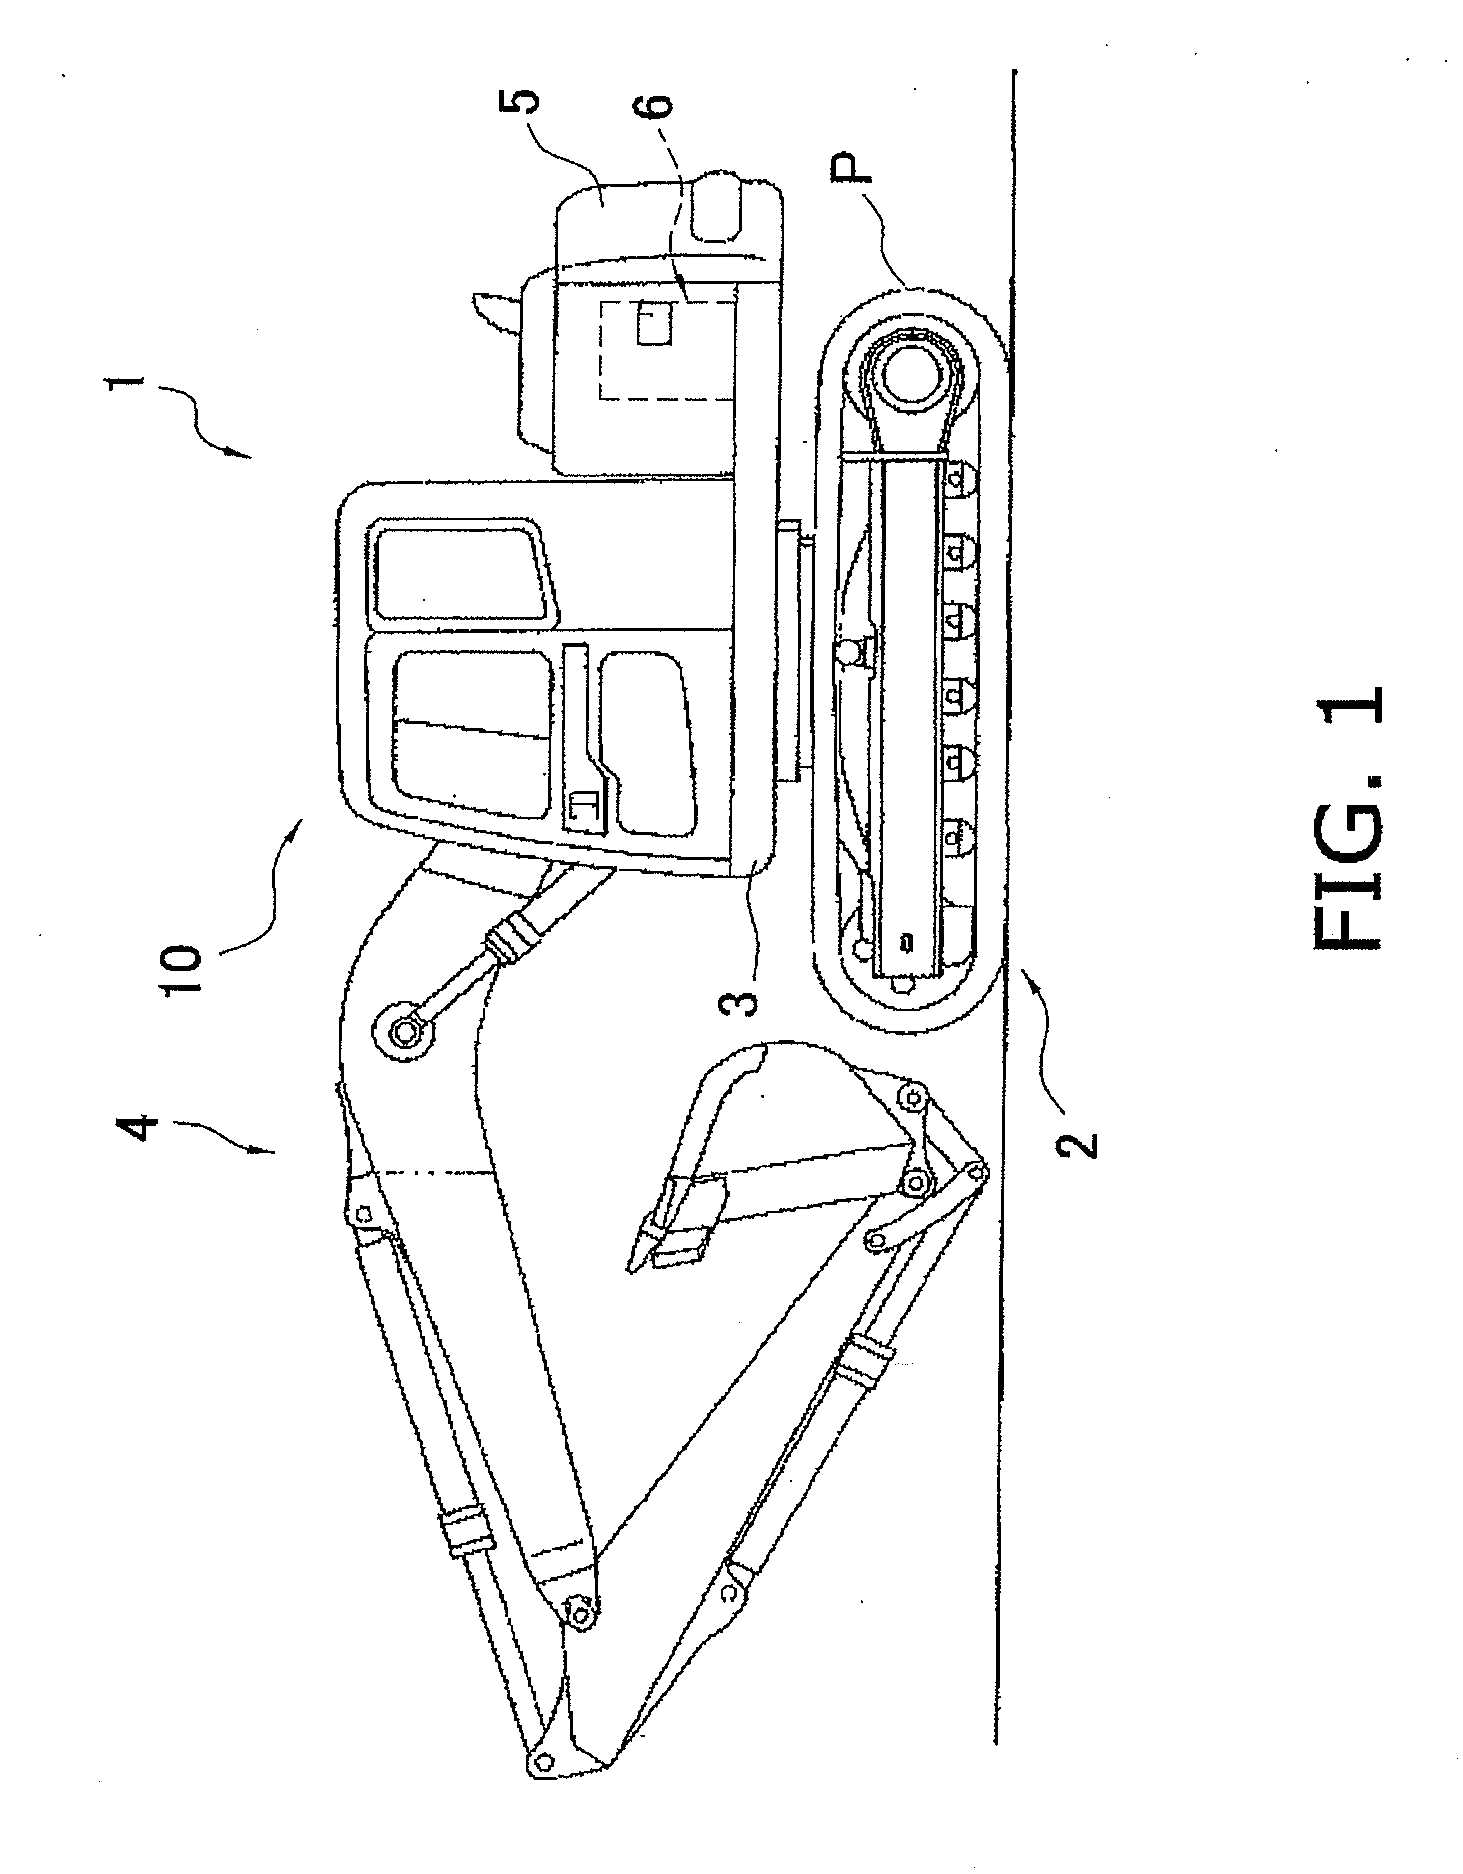 Reinforcement structure for pipe and cab structure for construction machine having the same